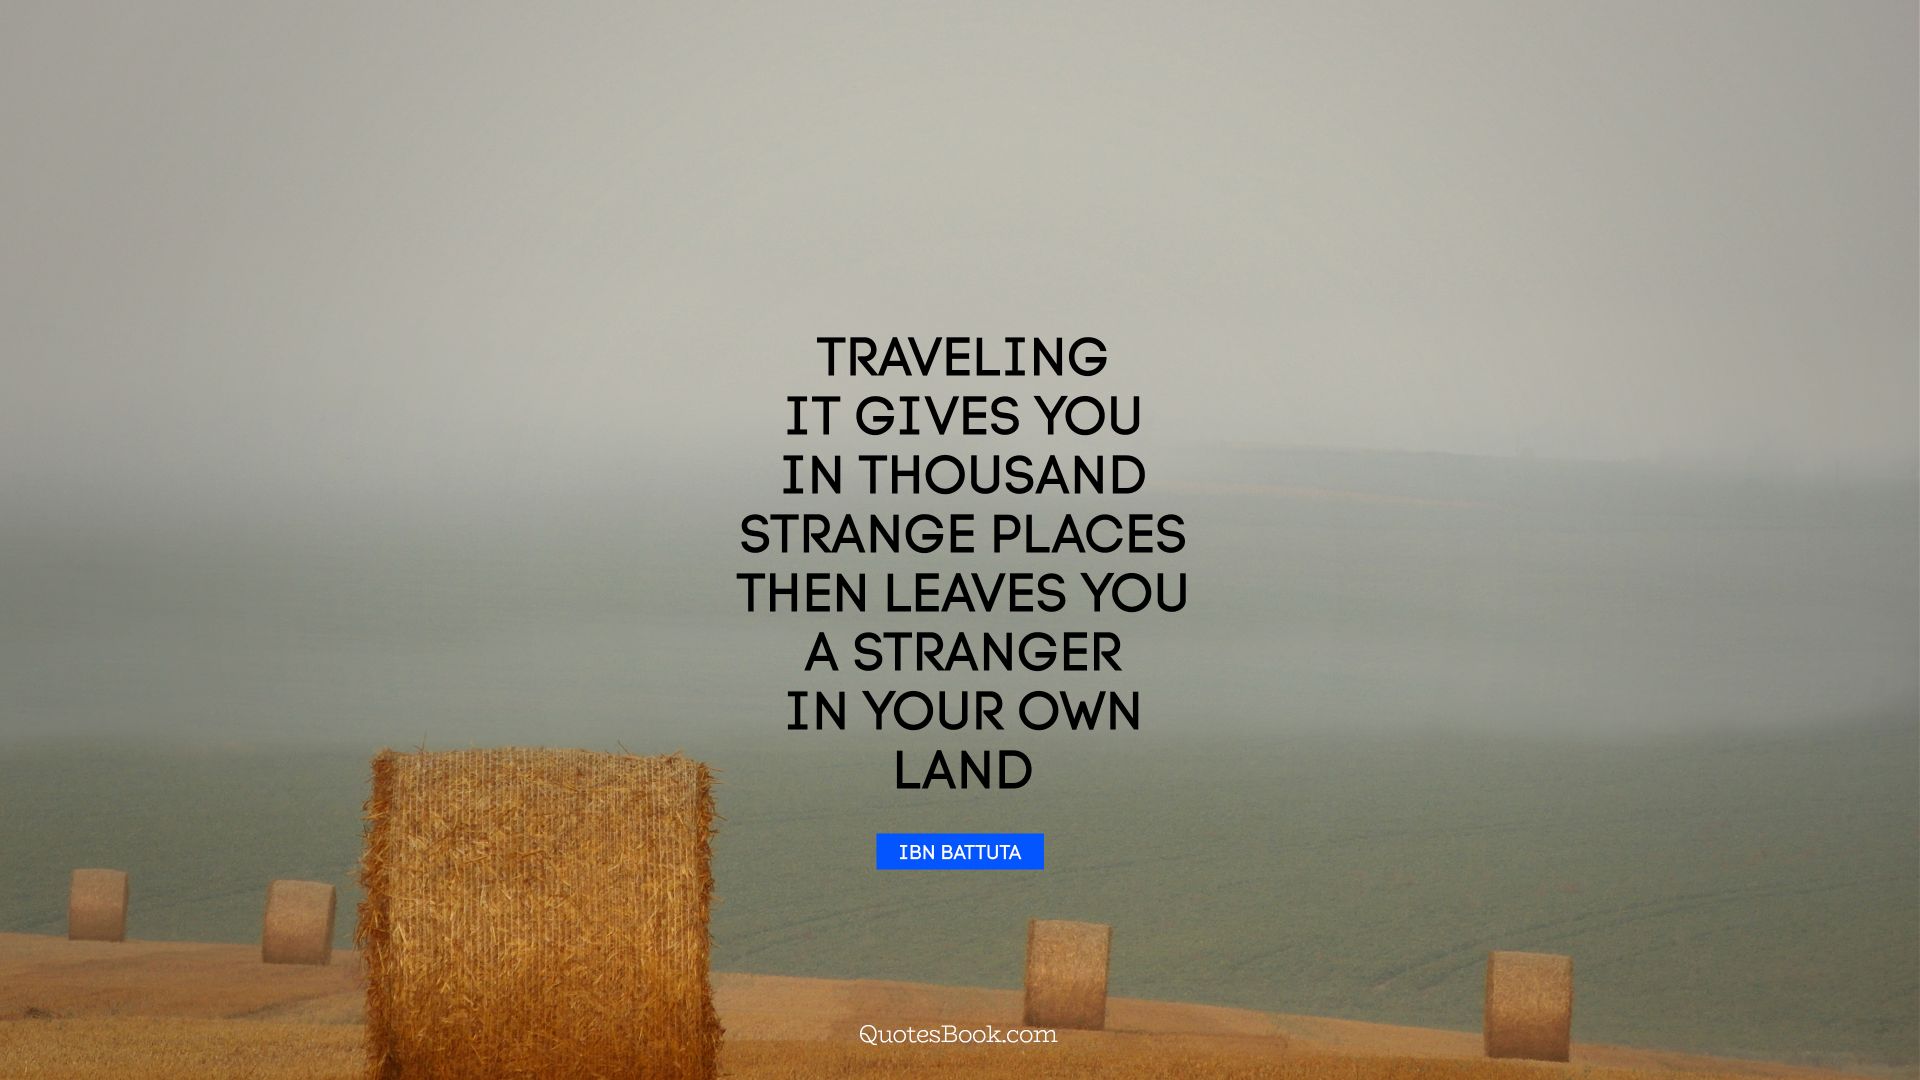 Traveling it gives you in thousand strange places then leaves you a stranger in your own land. - Quote by Ibn Battuta